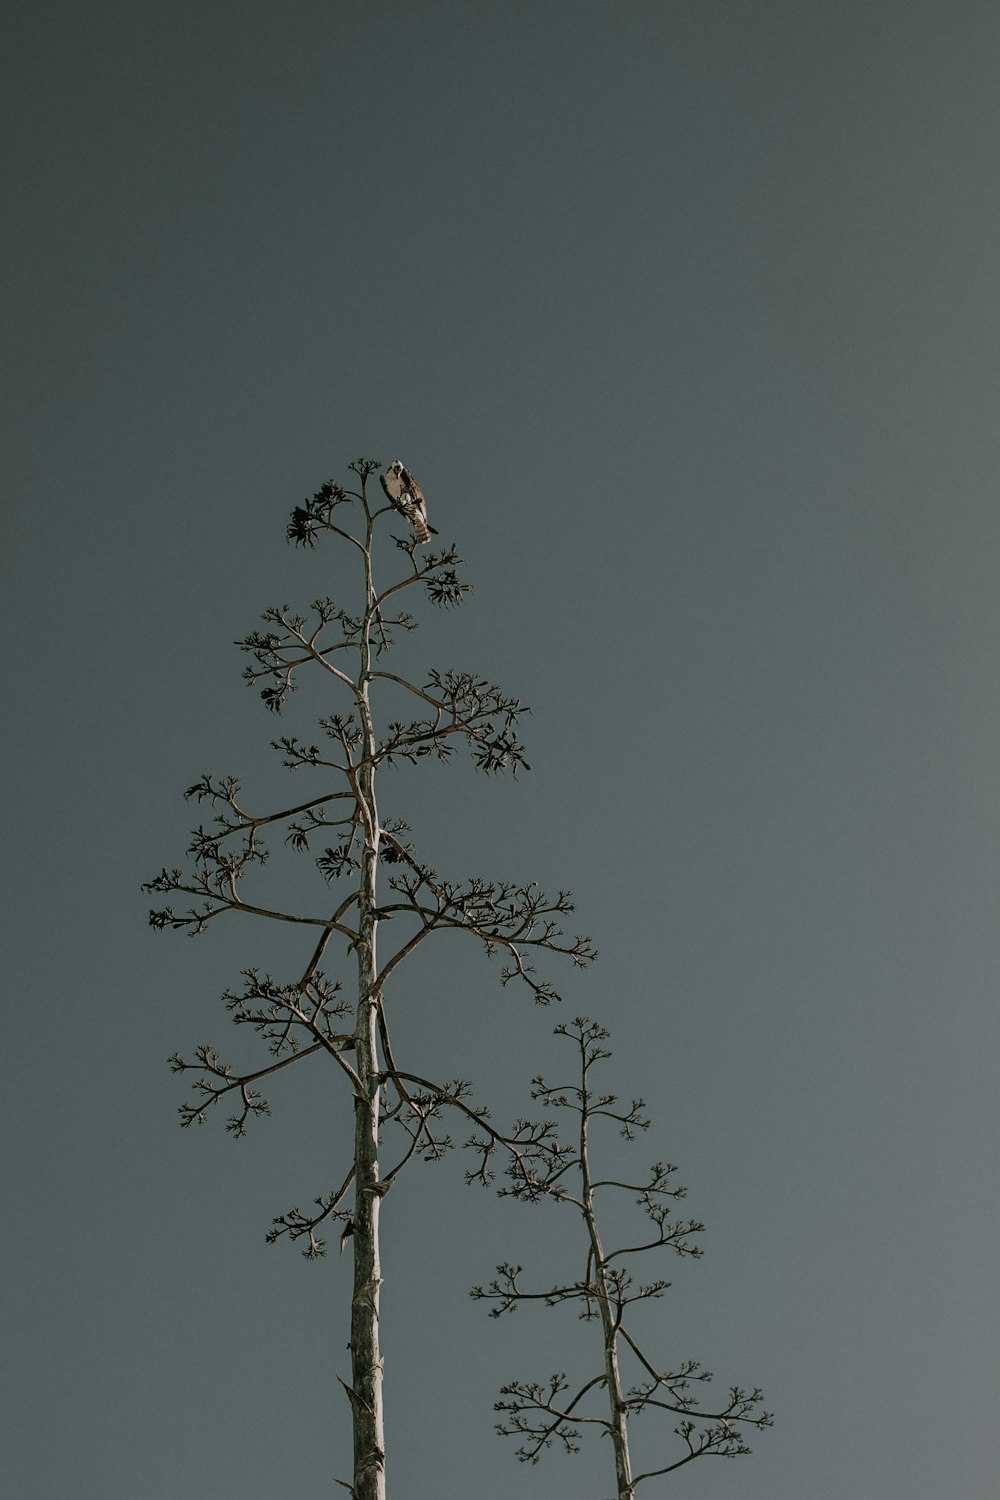 bird perched on top of tree during daytime